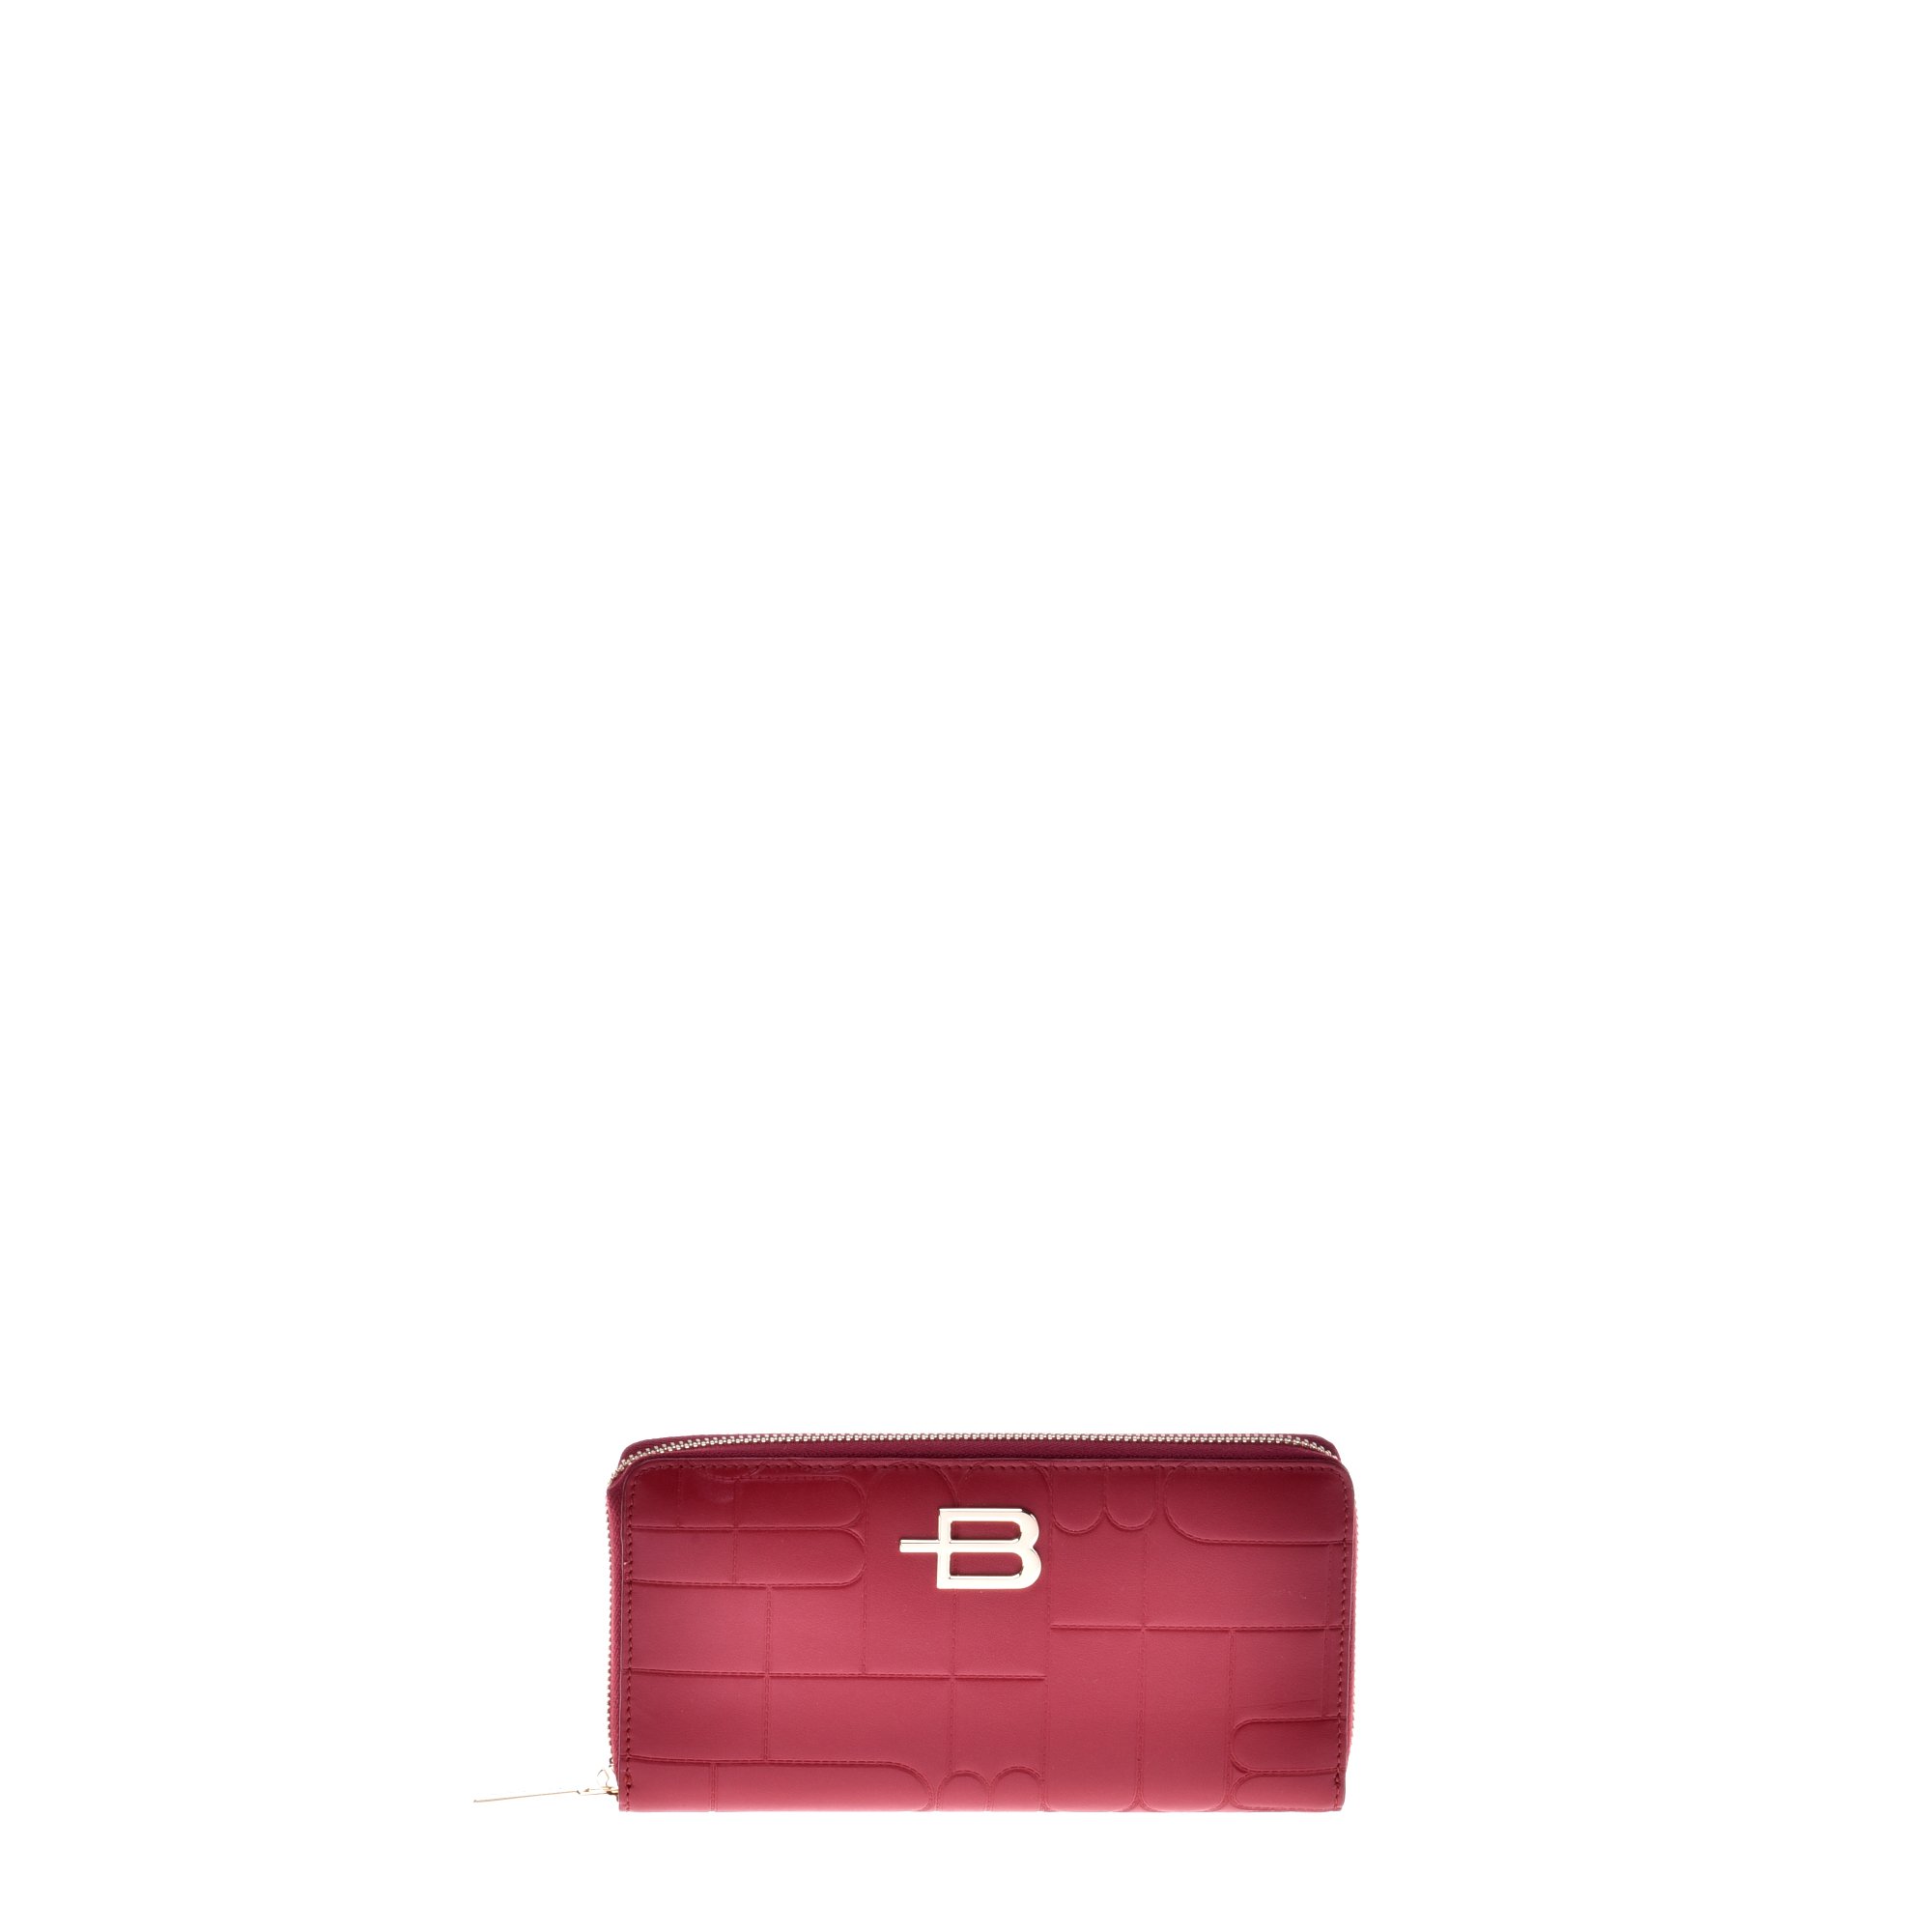 Red leather zipped wallet